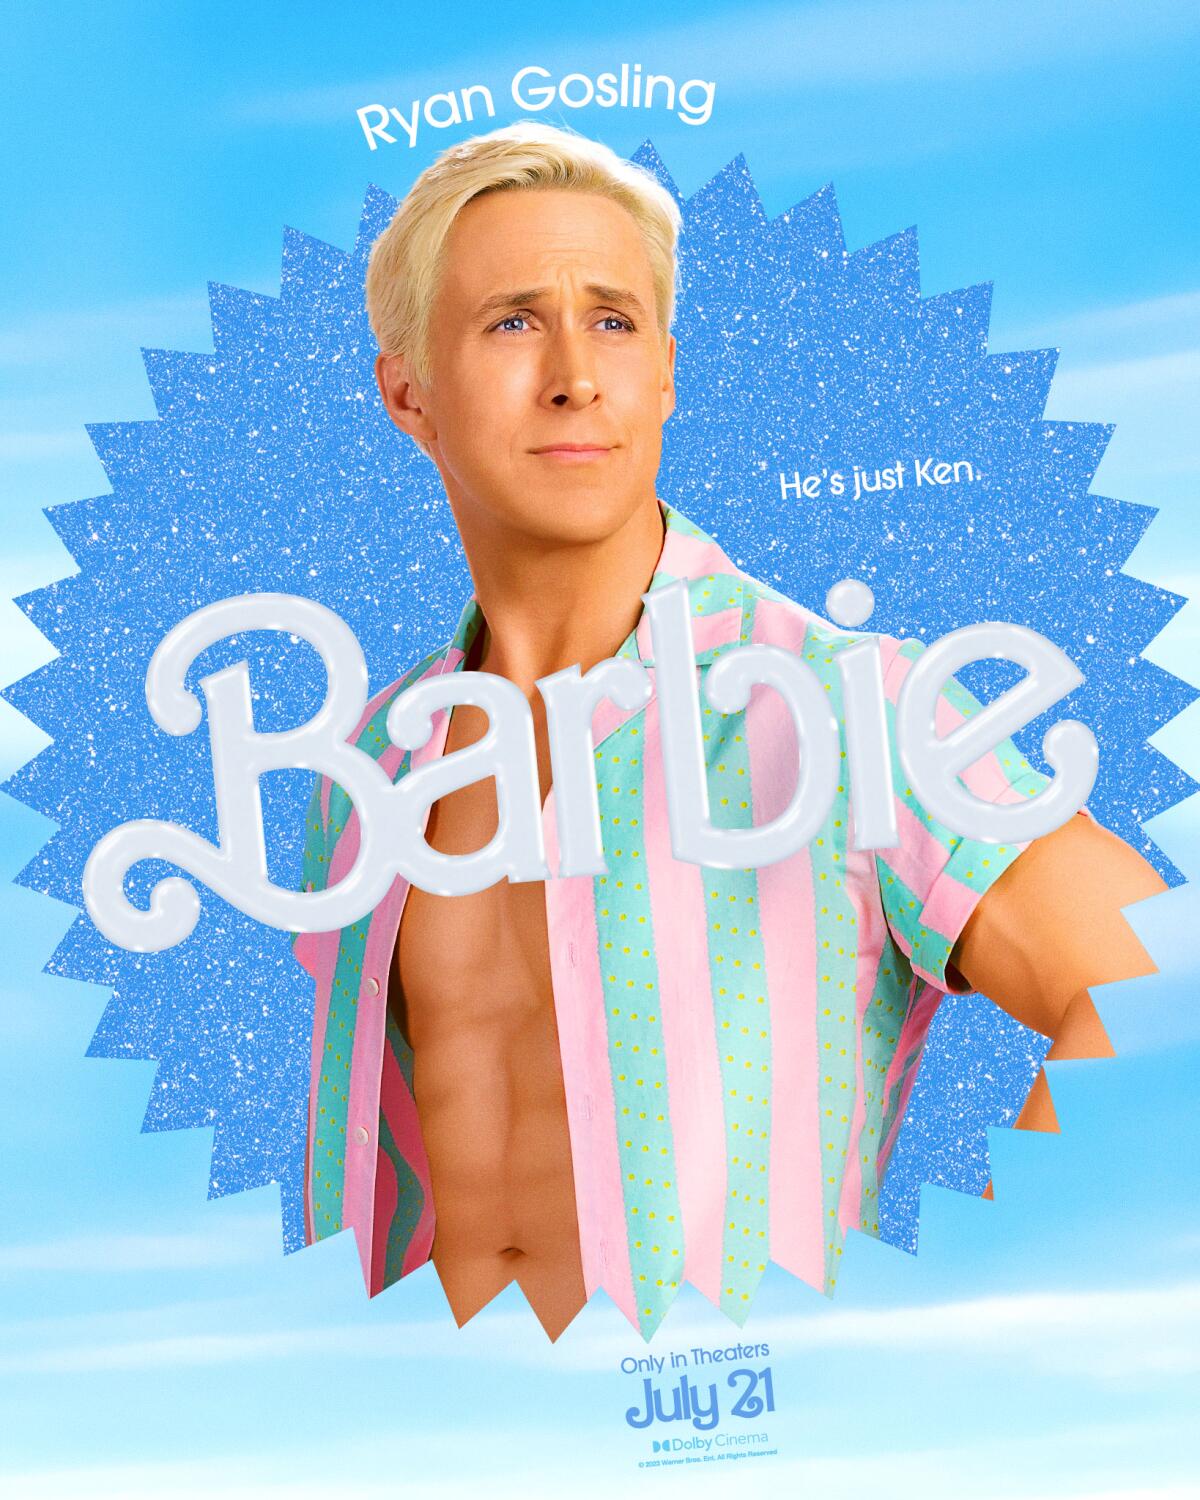 Ryan Gosling poses with his hands on his hips in a "Barbie" movie poster. He wears an unbuttoned, blue-and-pink striped shirt